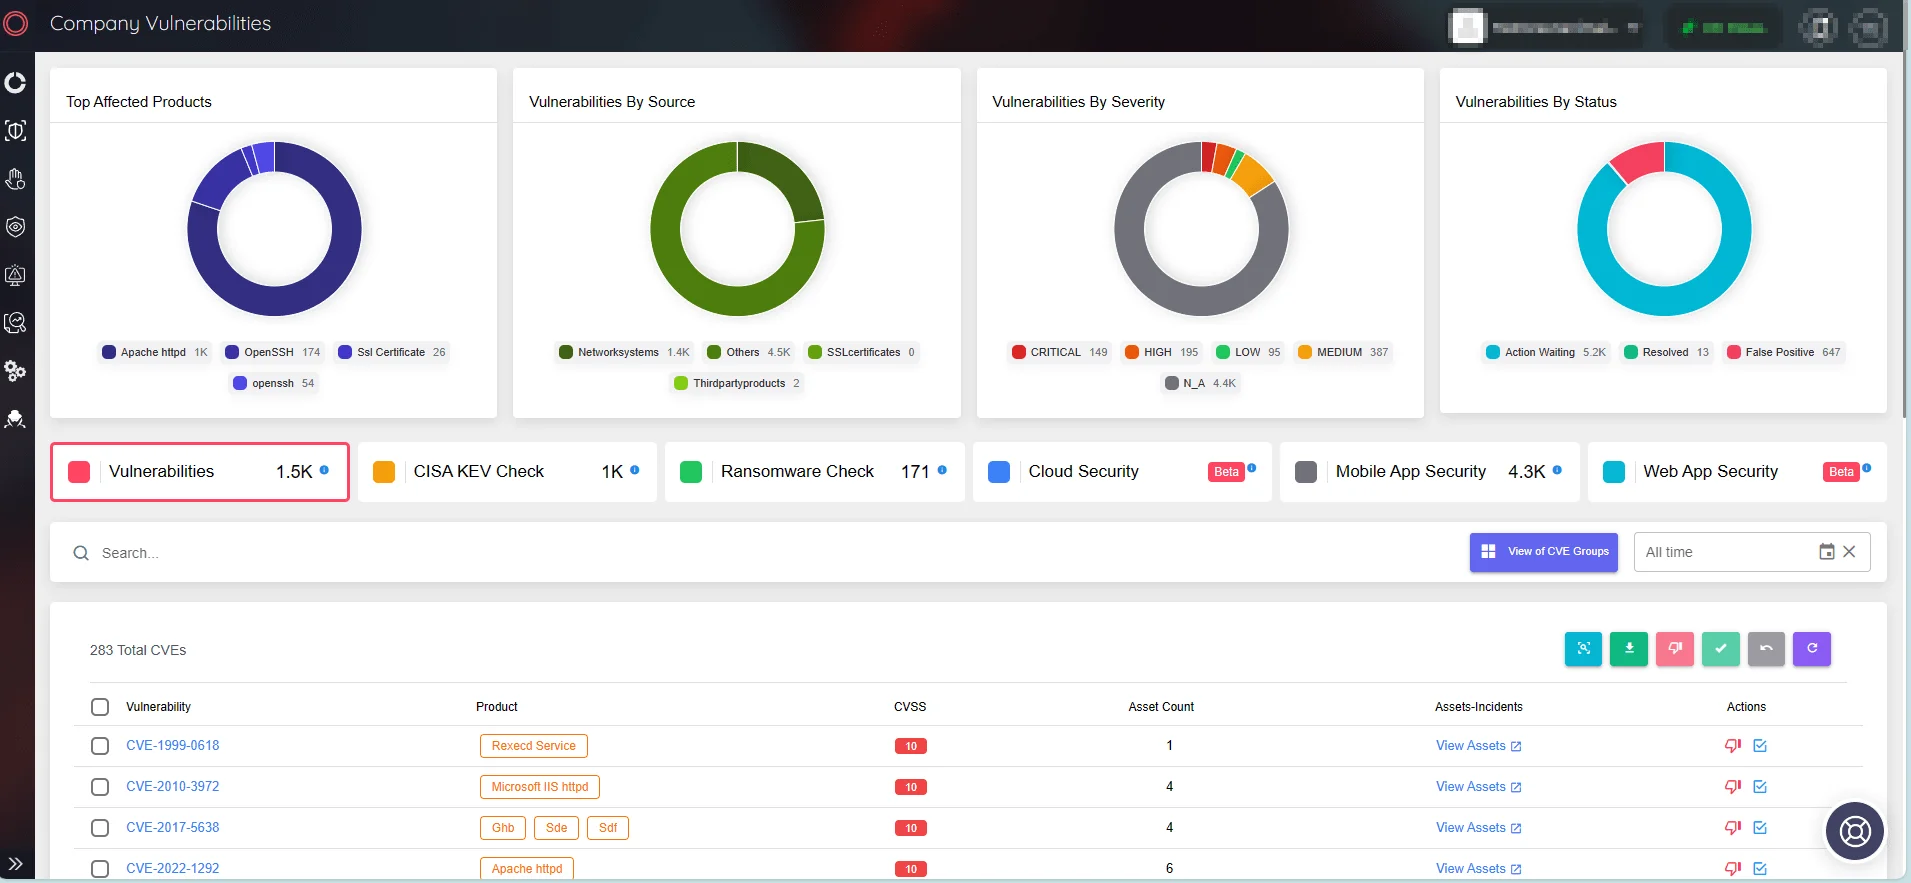 Monitor assets and manage Company Vulnerabilities on the SOCRadar platform